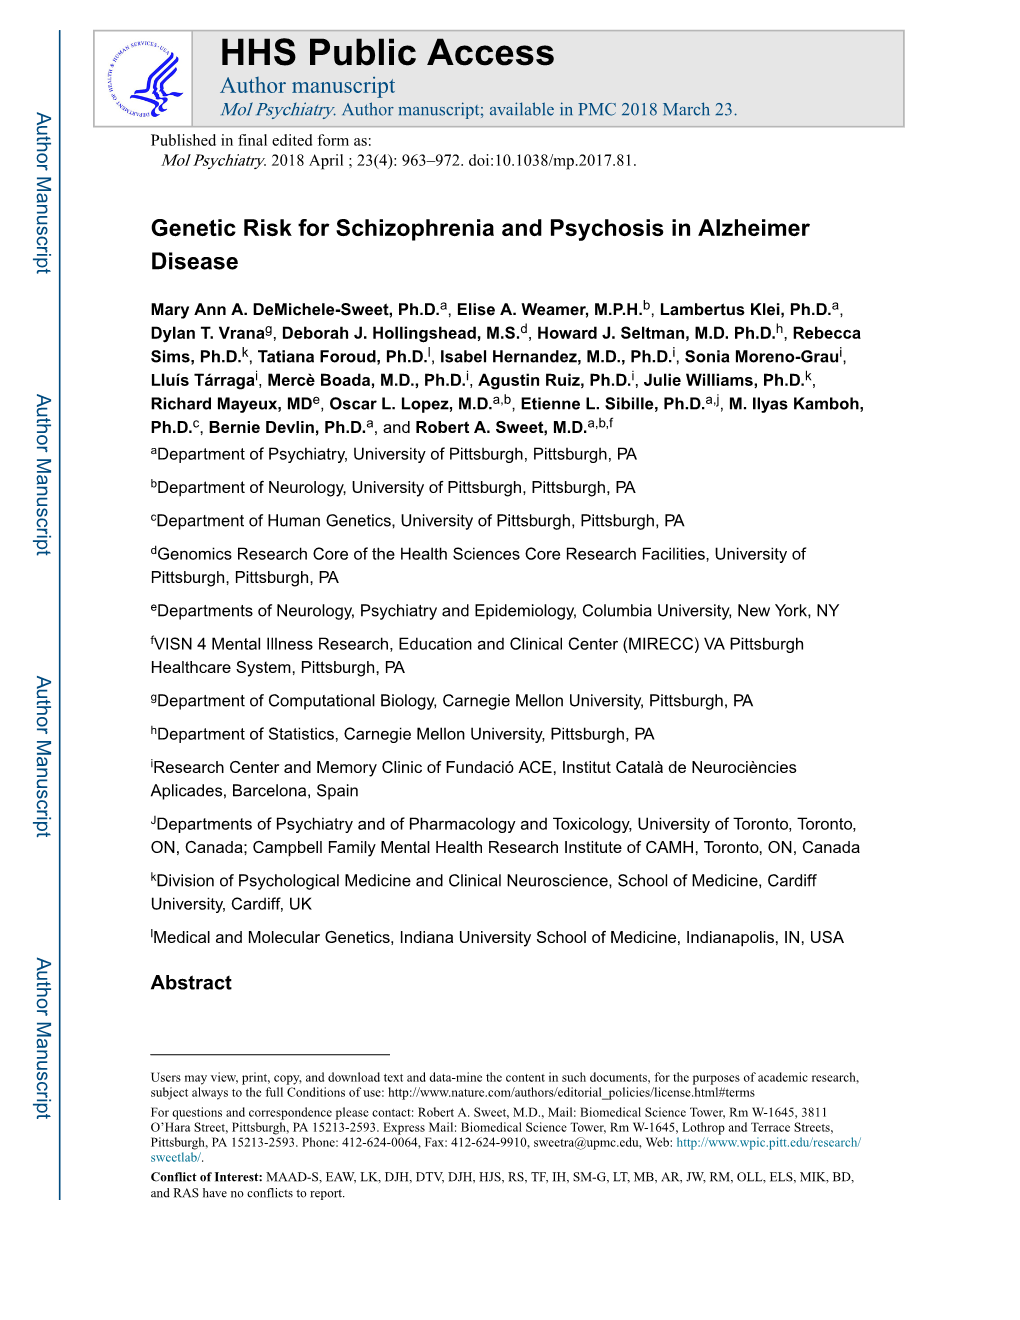 Genetic Risk for Schizophrenia and Psychosis in Alzheimer Disease